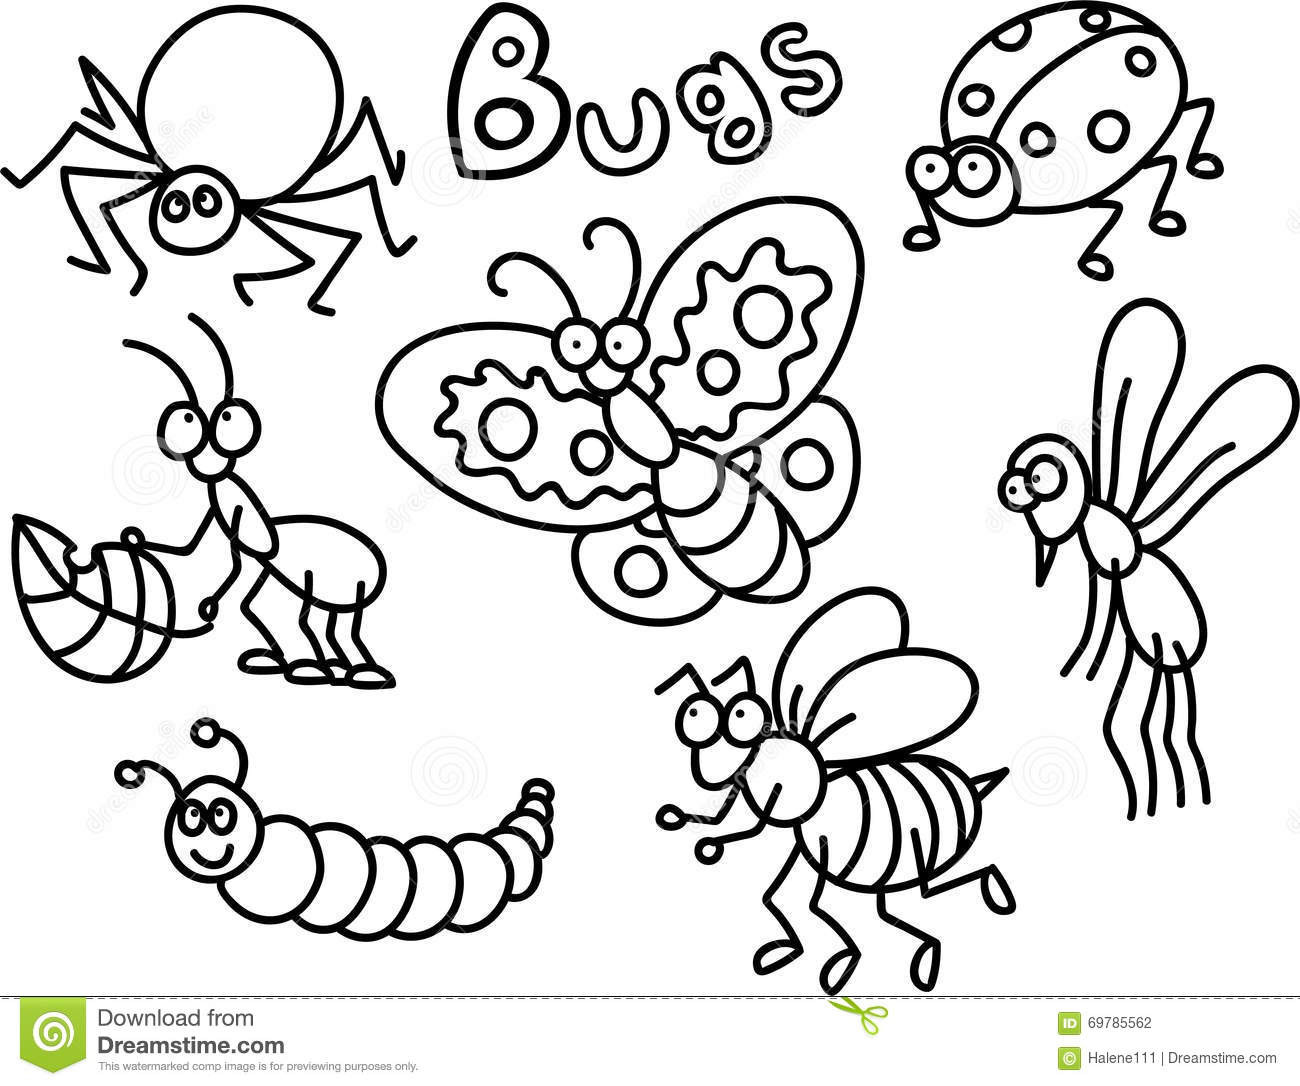 Bug Coloring Pages For Kids
 Bugs Coloring page stock illustration Illustration of